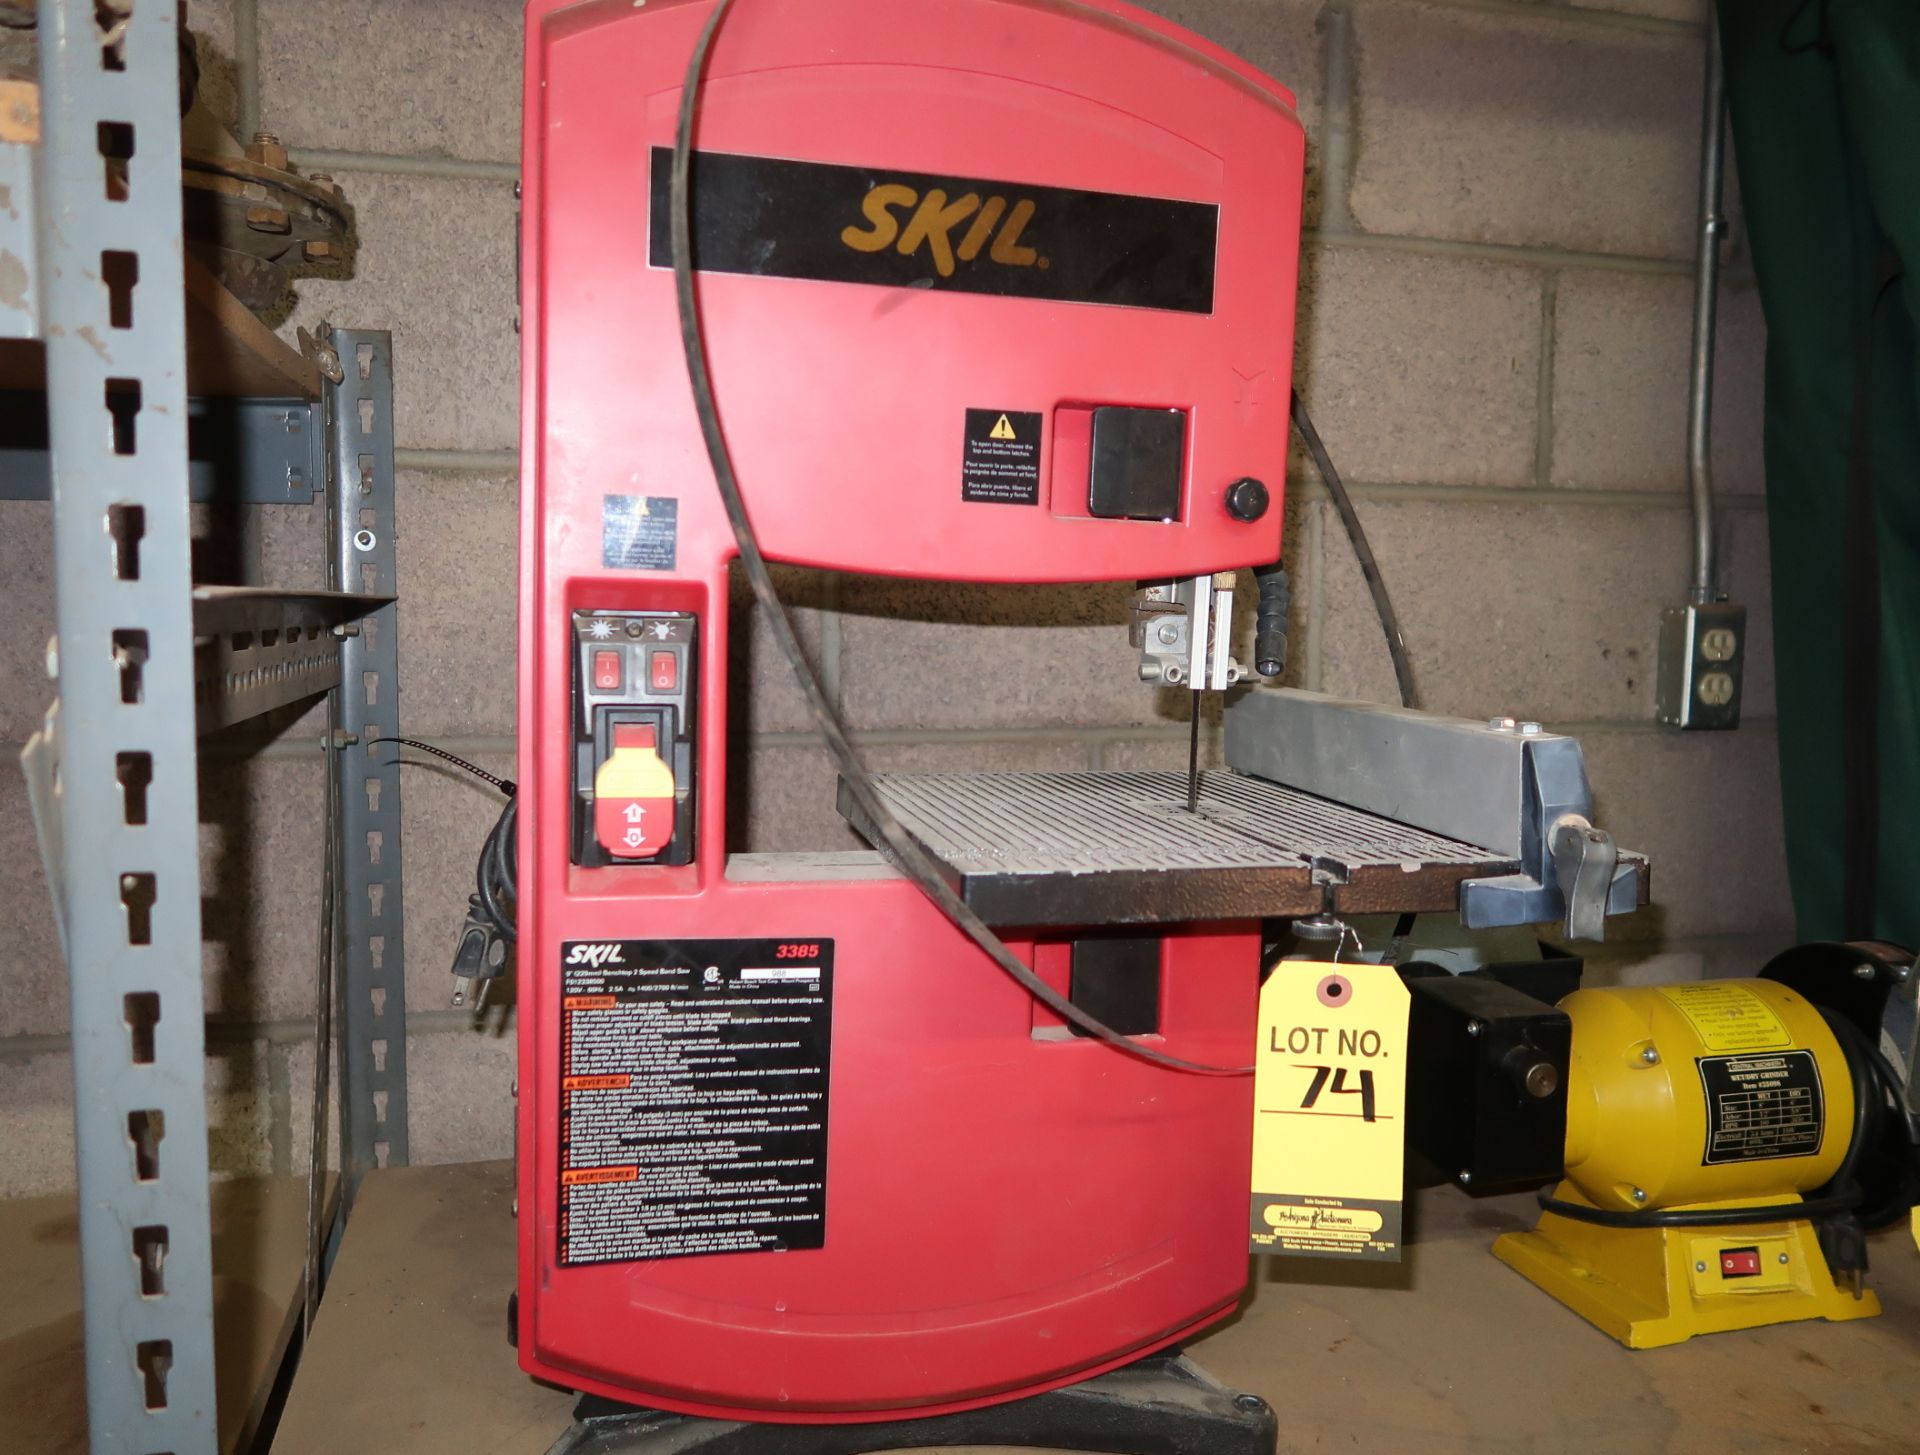 SKIL MDL. 3385 BENCH TOP 2 SPEED BANDSAW